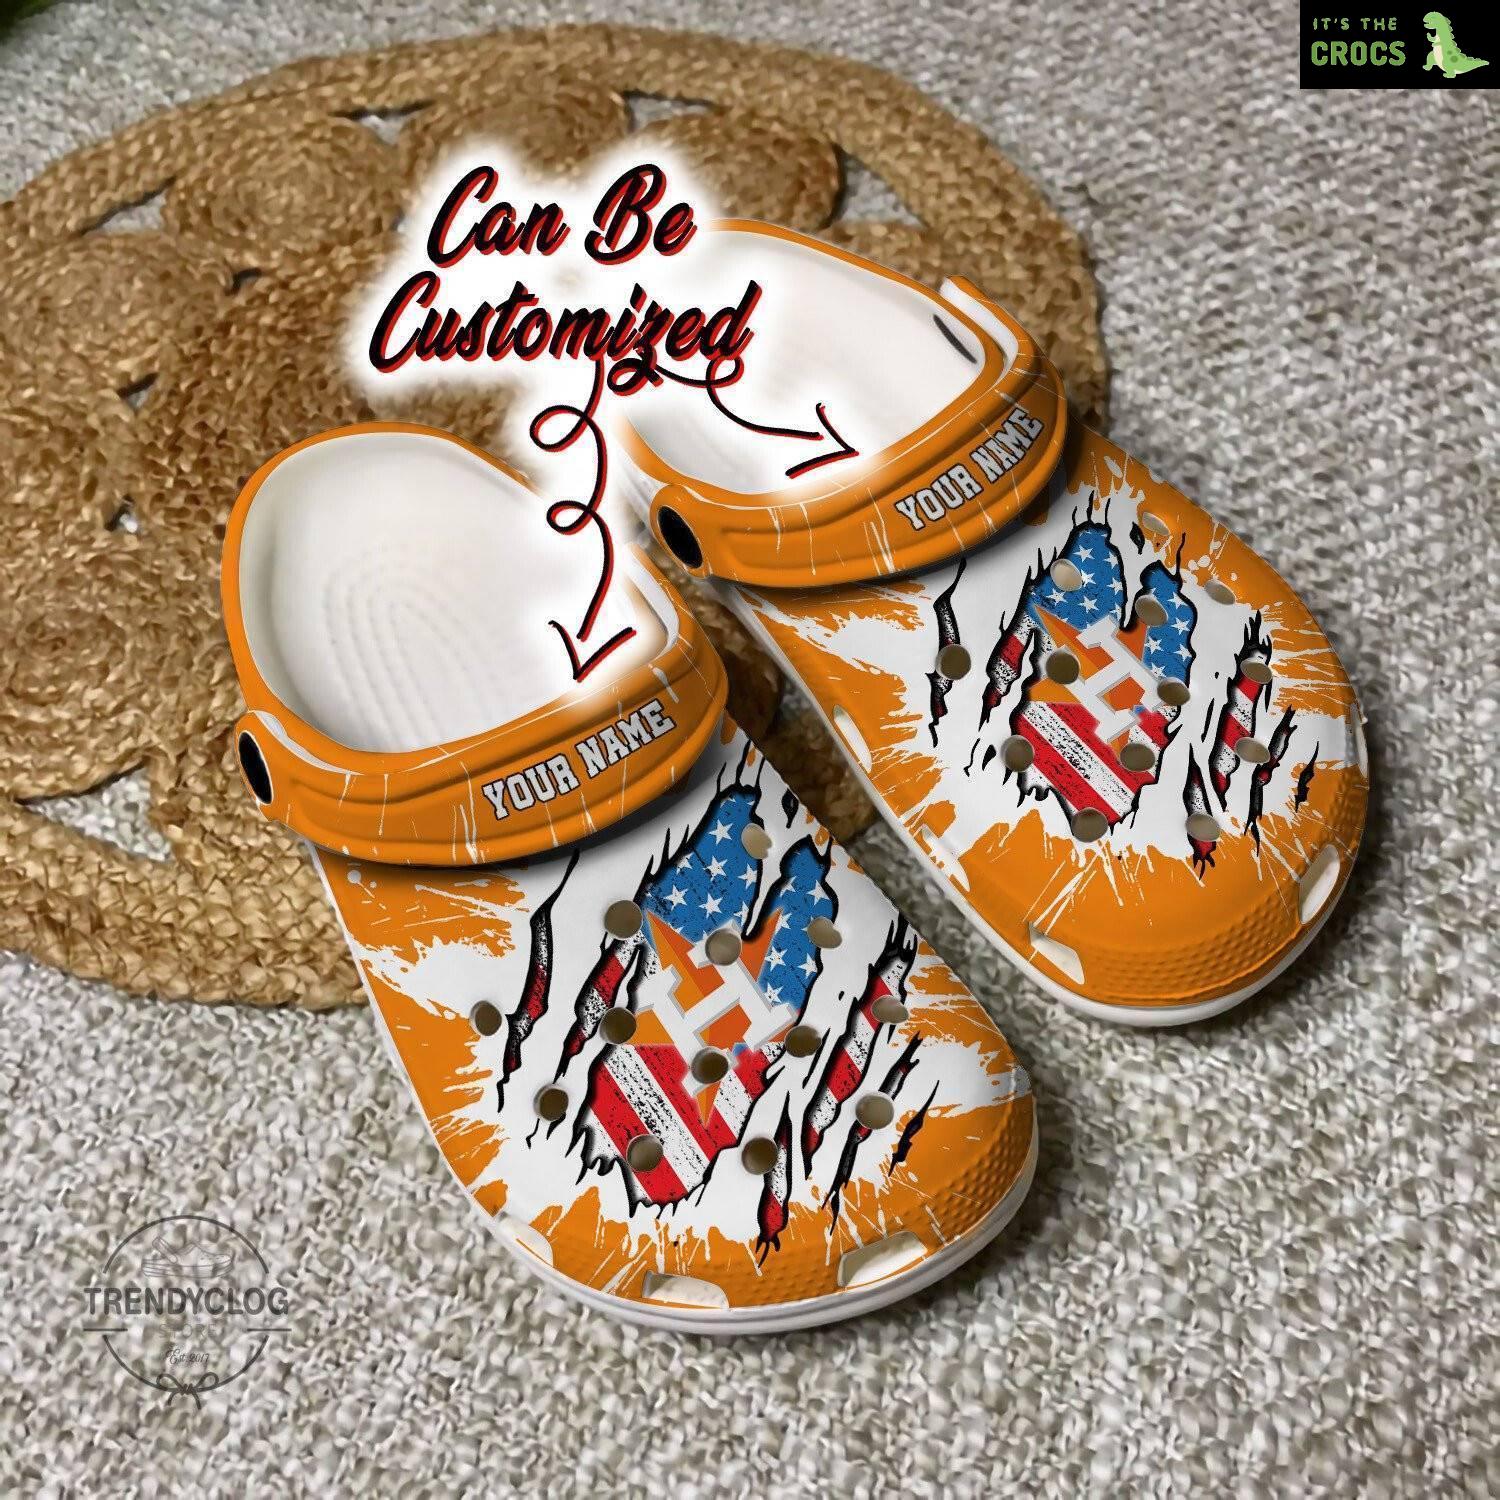 Astros Crocs Personalized HAstros Baseball Ripped American Flag Clog Shoes